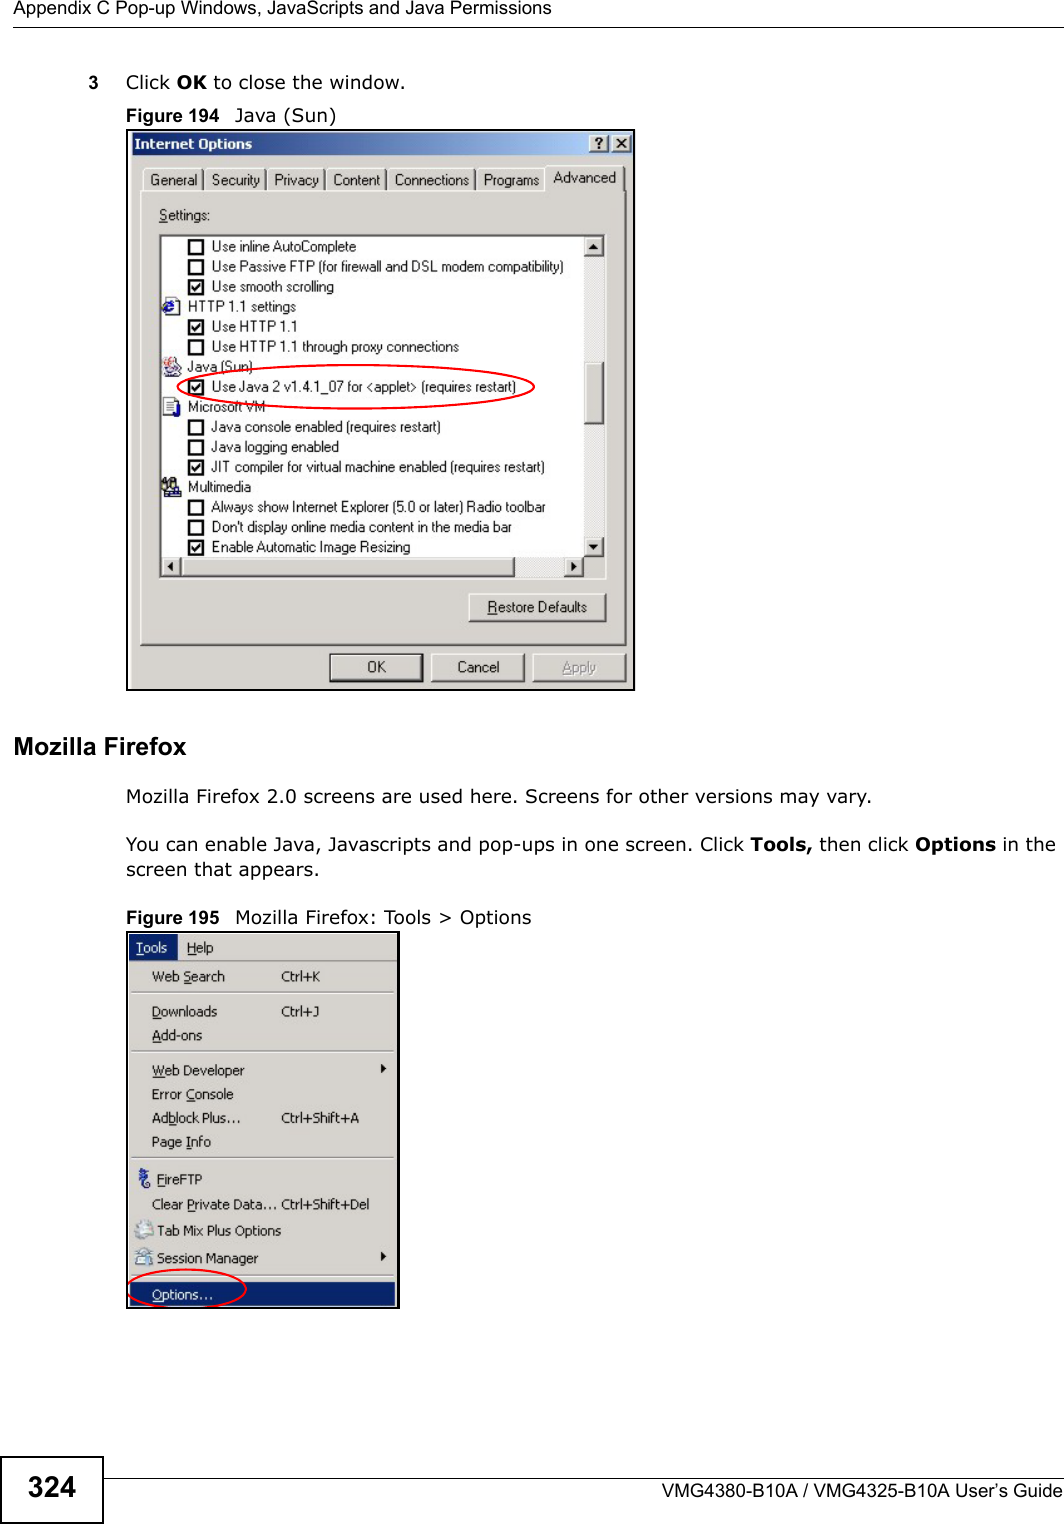 Appendix C Pop-up Windows, JavaScripts and Java PermissionsVMG4380-B10A / VMG4325-B10A User’s Guide3243Click OK to close the window.Figure 194   Java (Sun)Mozilla FirefoxMozilla Firefox 2.0 screens are used here. Screens for other versions may vary. You can enable Java, Javascripts and pop-ups in one screen. Click Tools, then click Options in the screen that appears.Figure 195   Mozilla Firefox: Tools &gt; Options